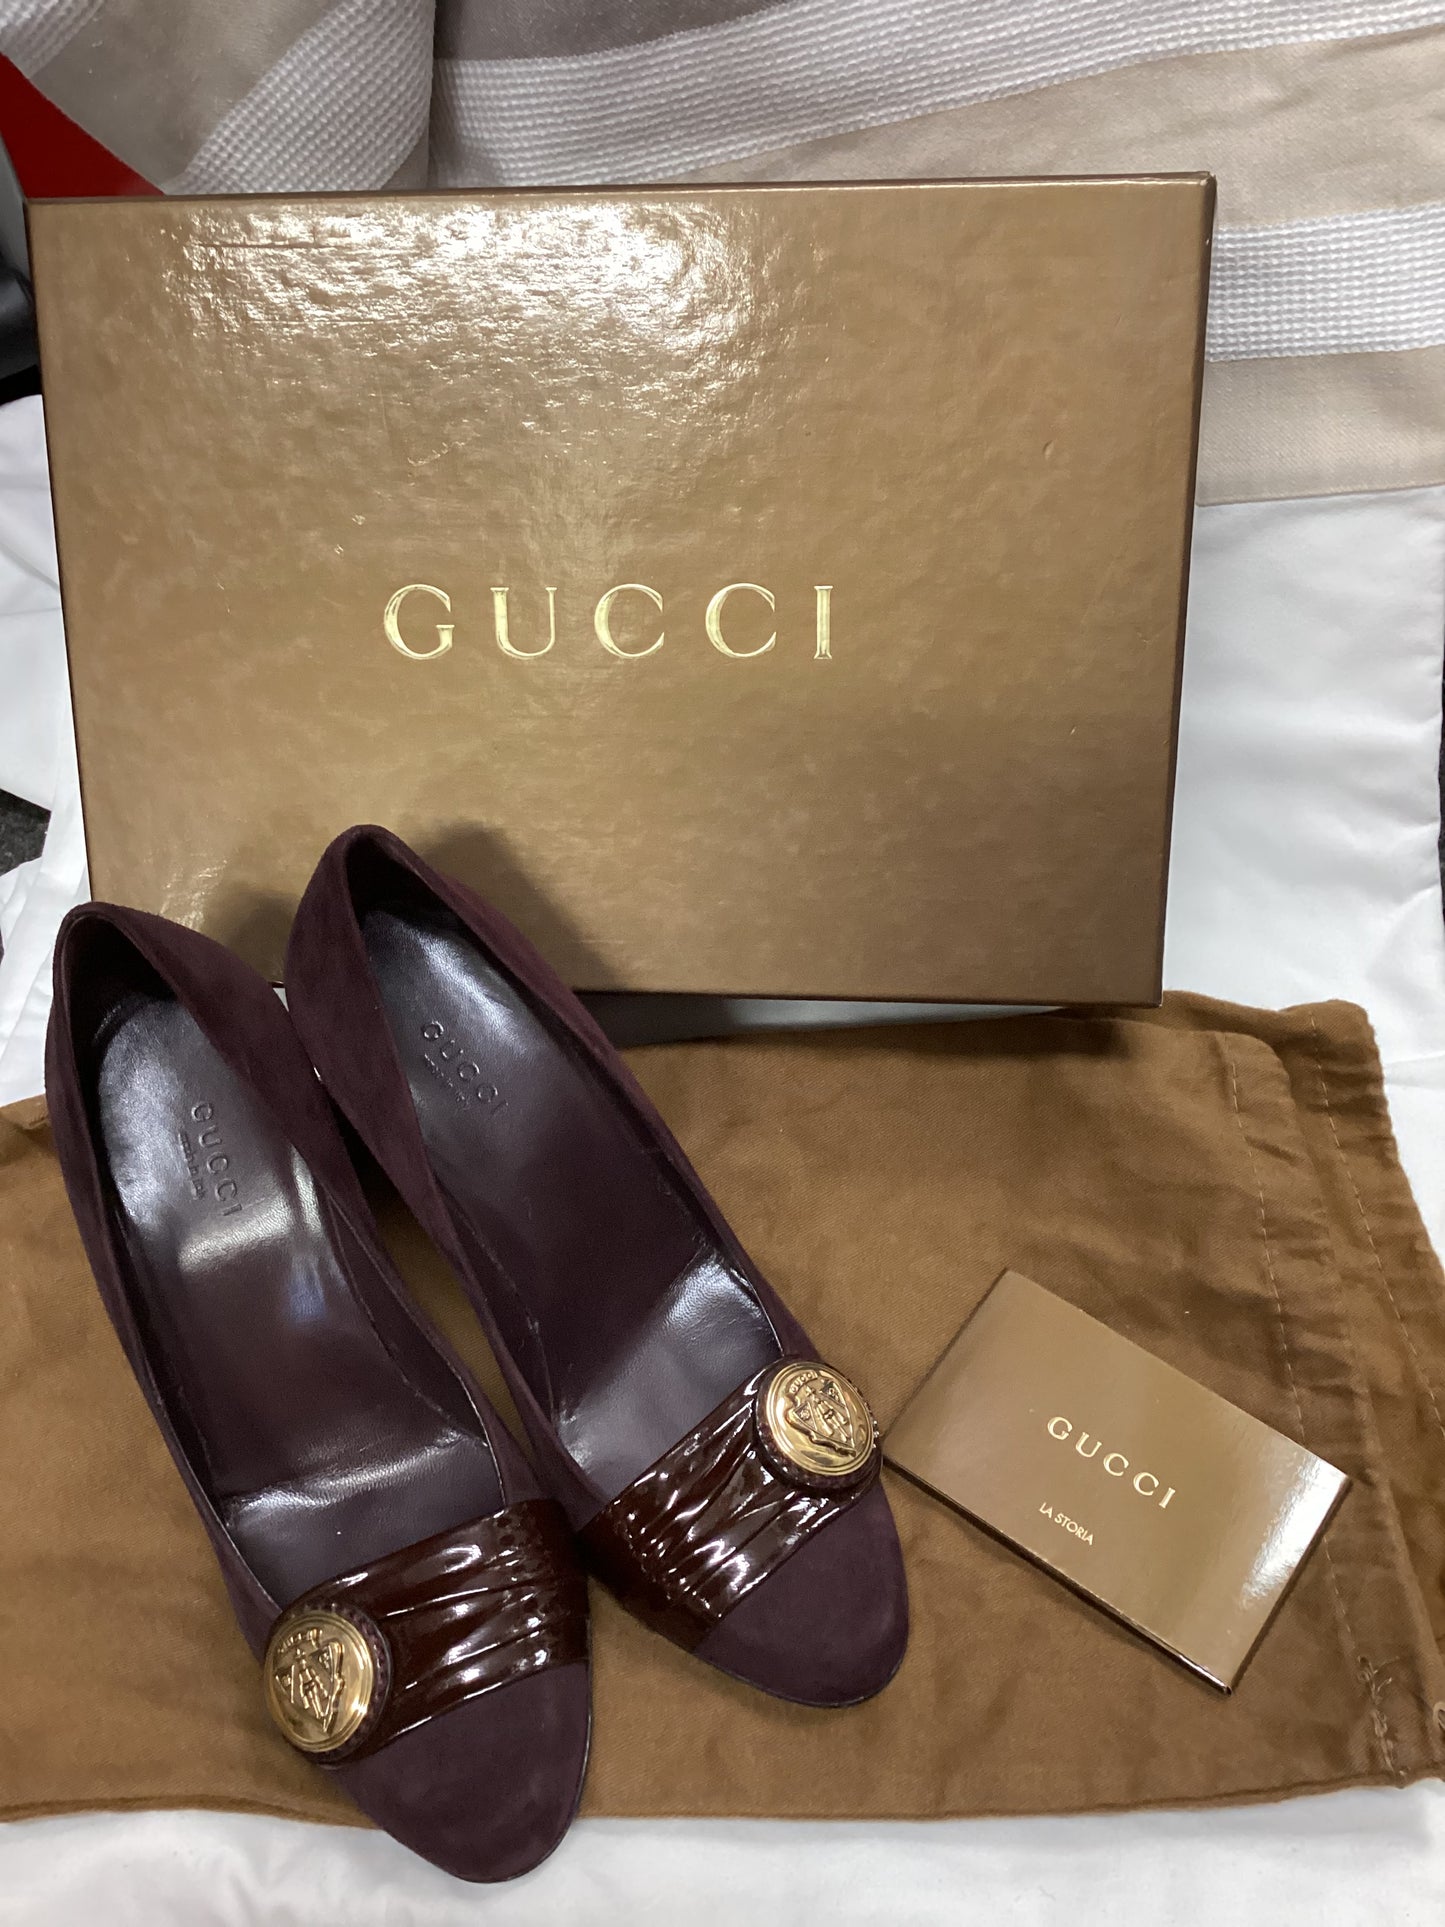 Gucci Woman’s size 3.5 Suede Court Shoes with Napa Logo, Boxed with Dust Bags